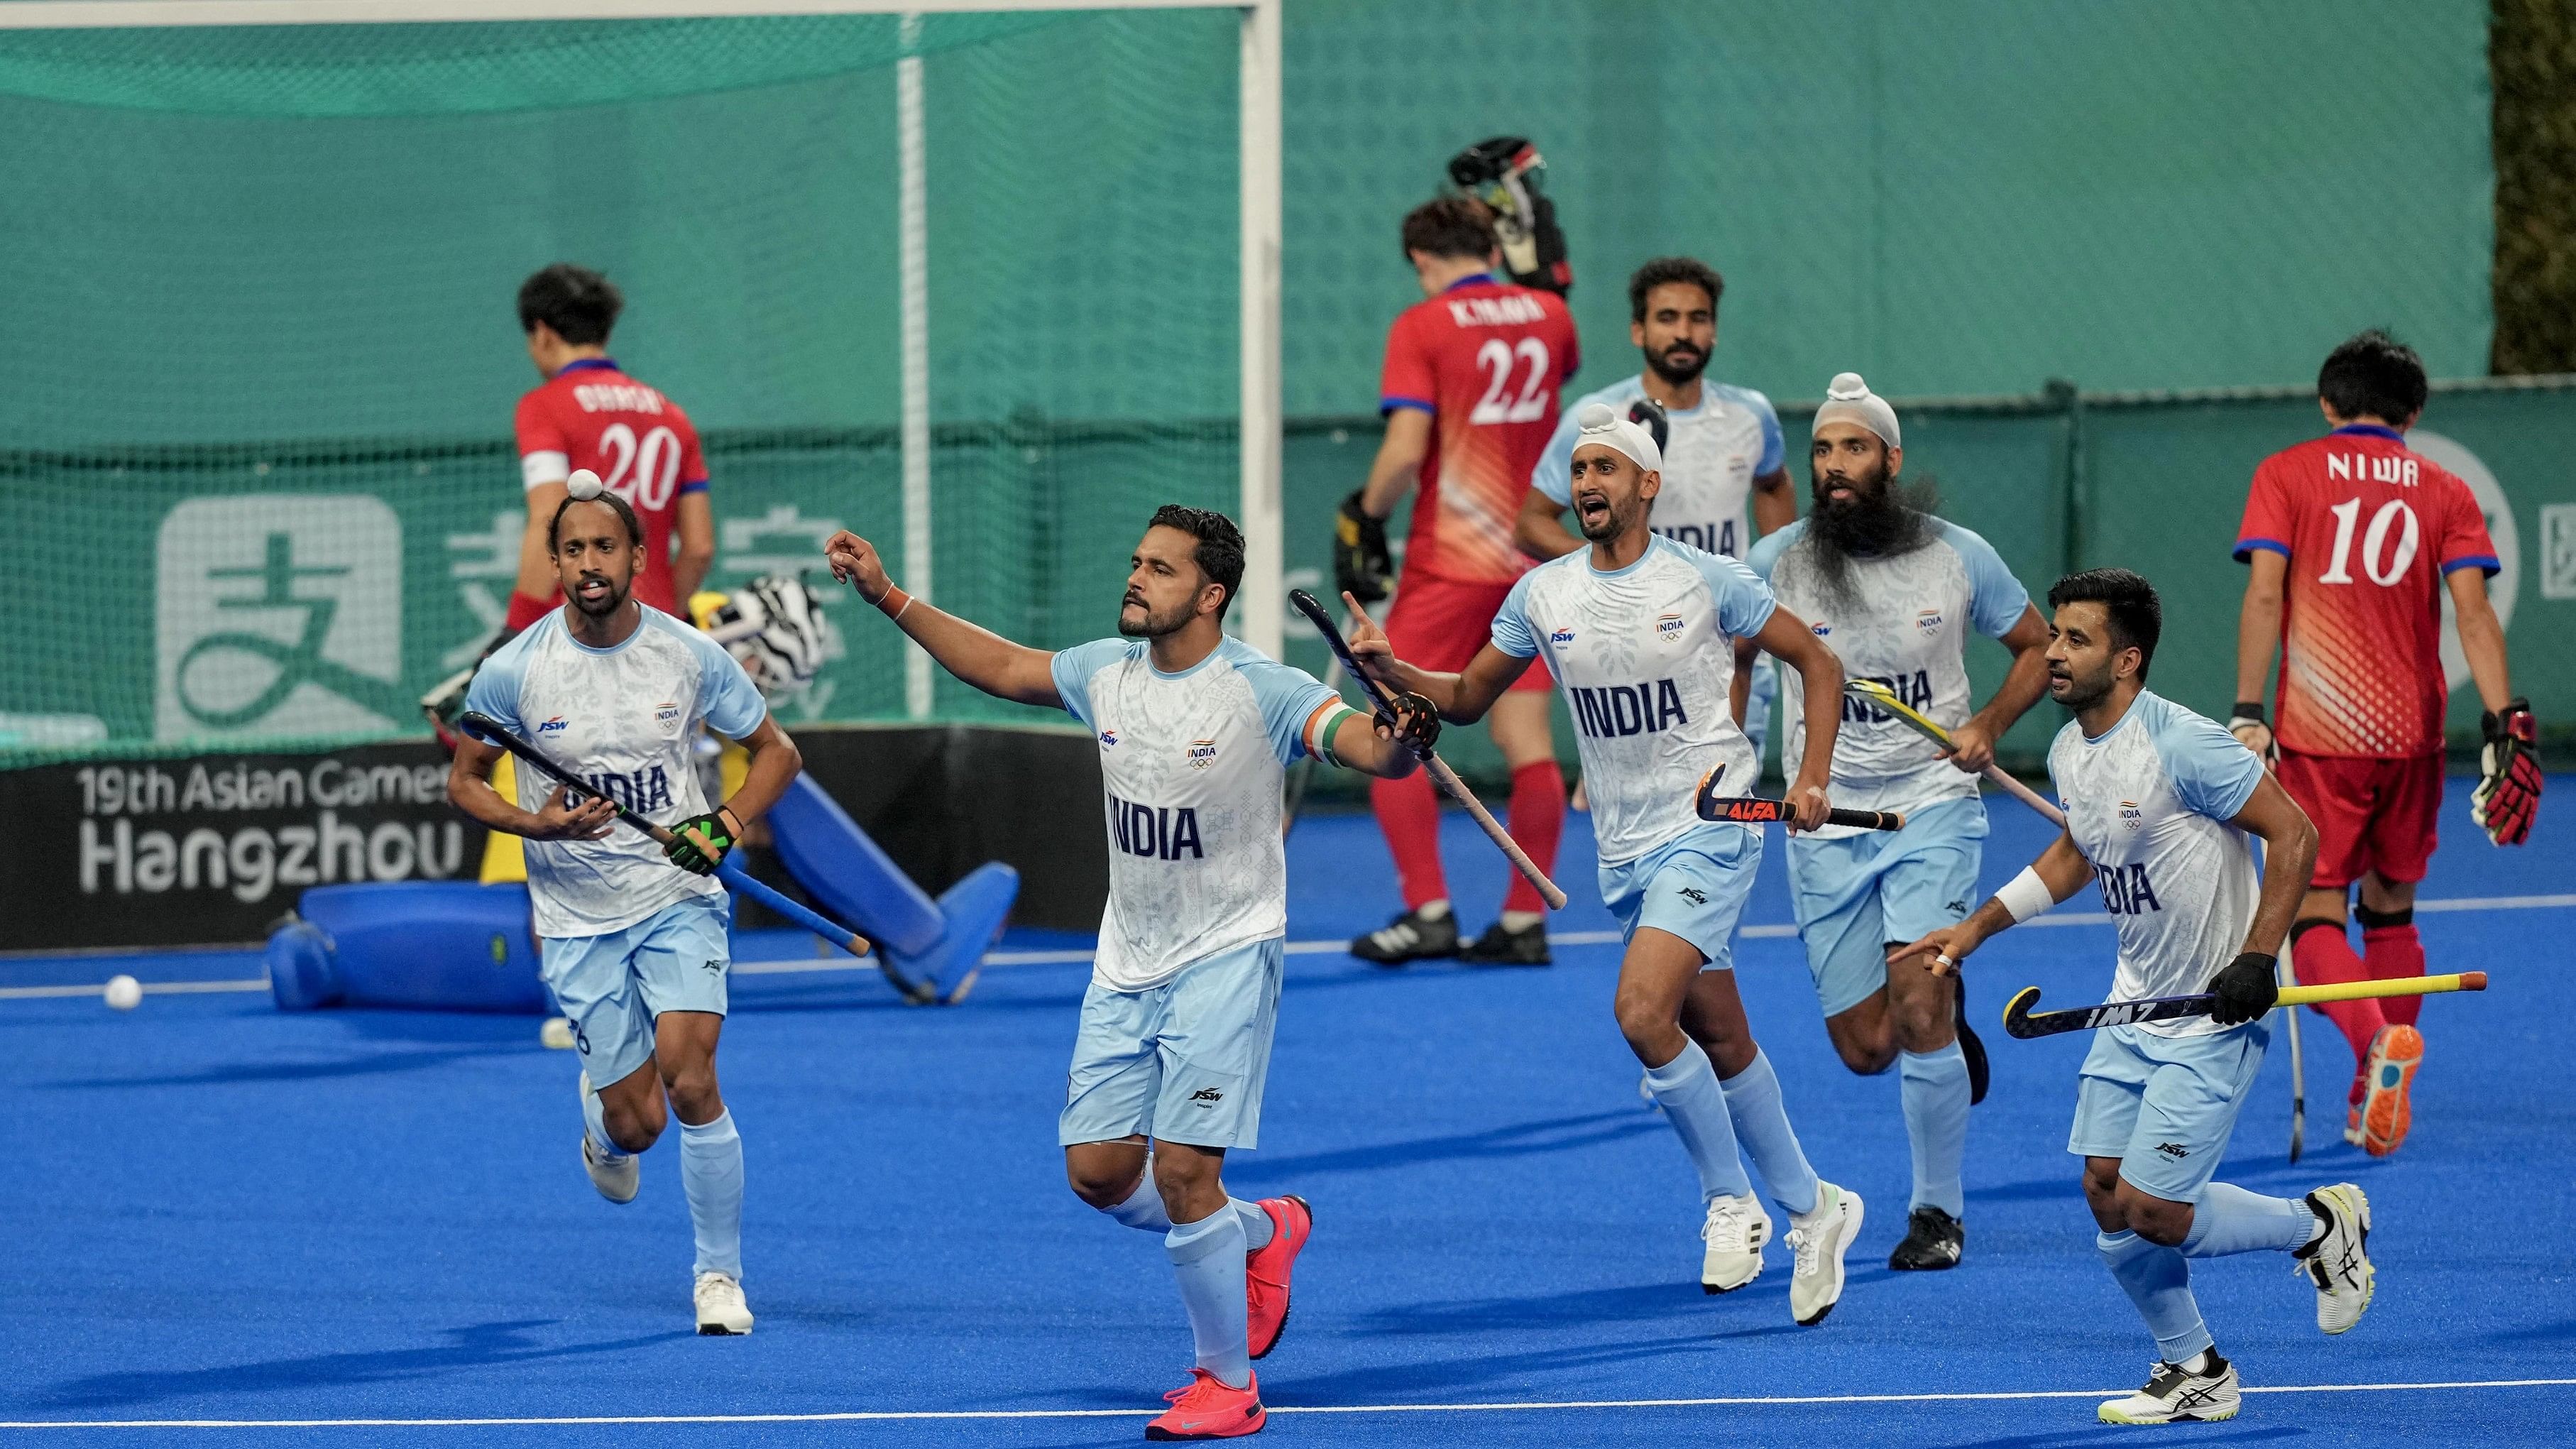 <div class="paragraphs"><p>India's captain Harmanpreet Singh celebrates with teammates after scoring a goal against Japan during the Men's Hockey Final match at the 19th Asian Games  </p></div>